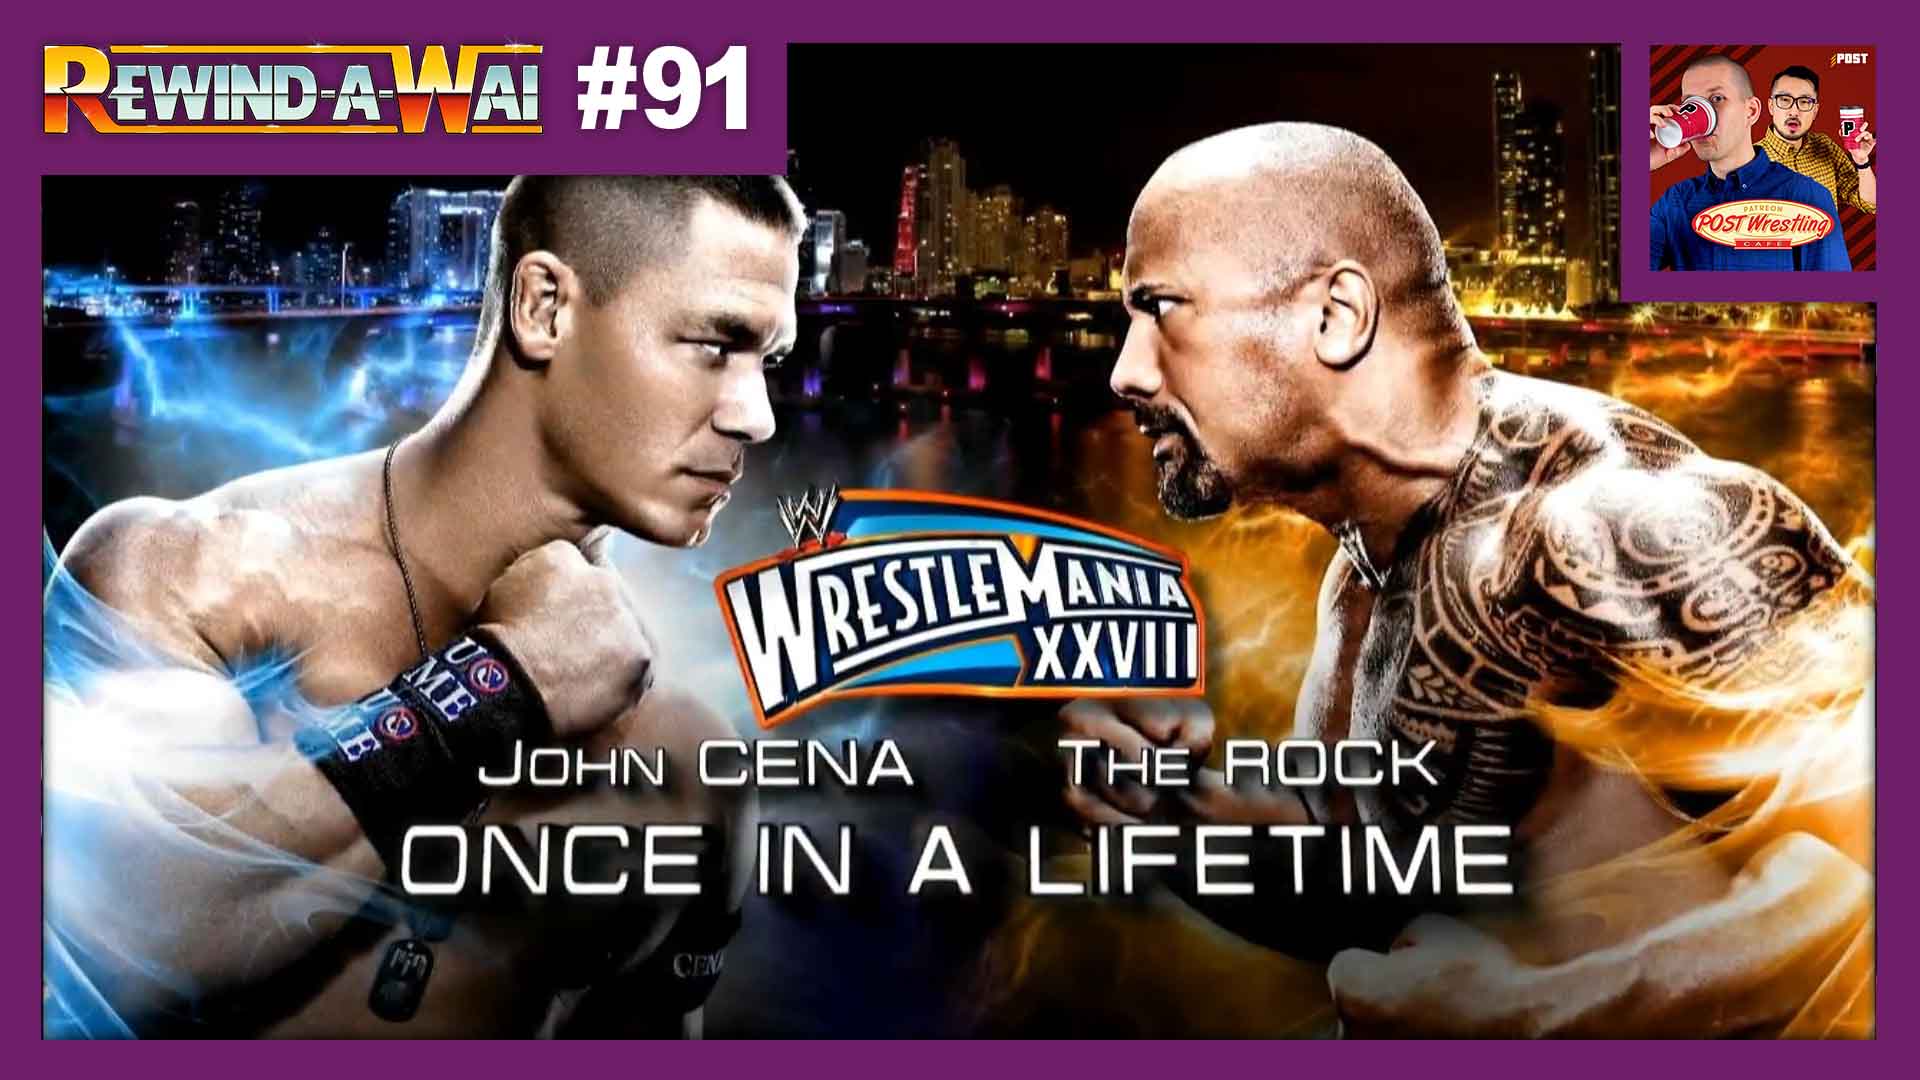 Wrestlemania 28 results and live matches coverage for John Cena vs